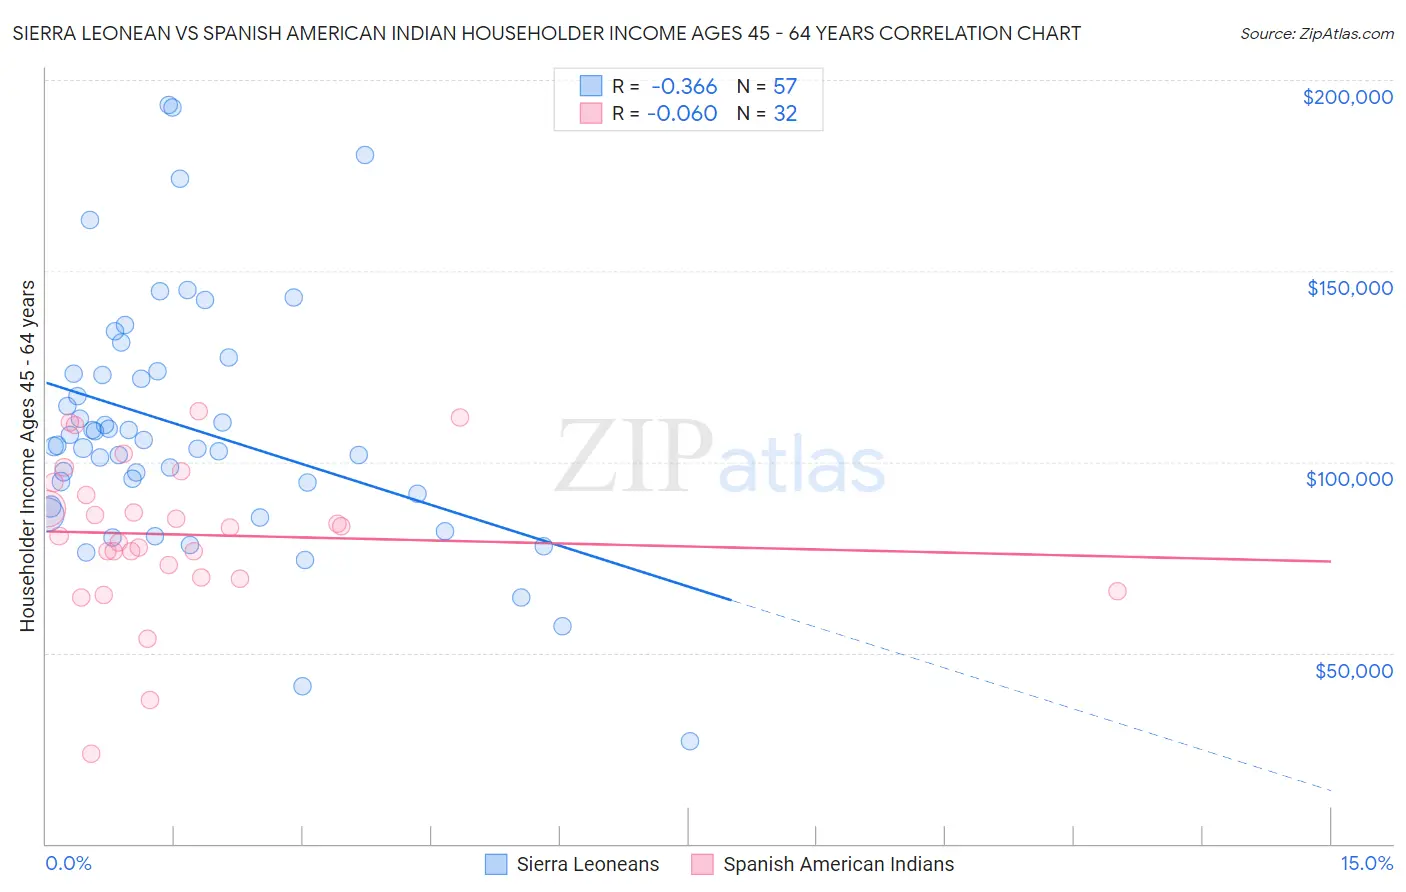 Sierra Leonean vs Spanish American Indian Householder Income Ages 45 - 64 years